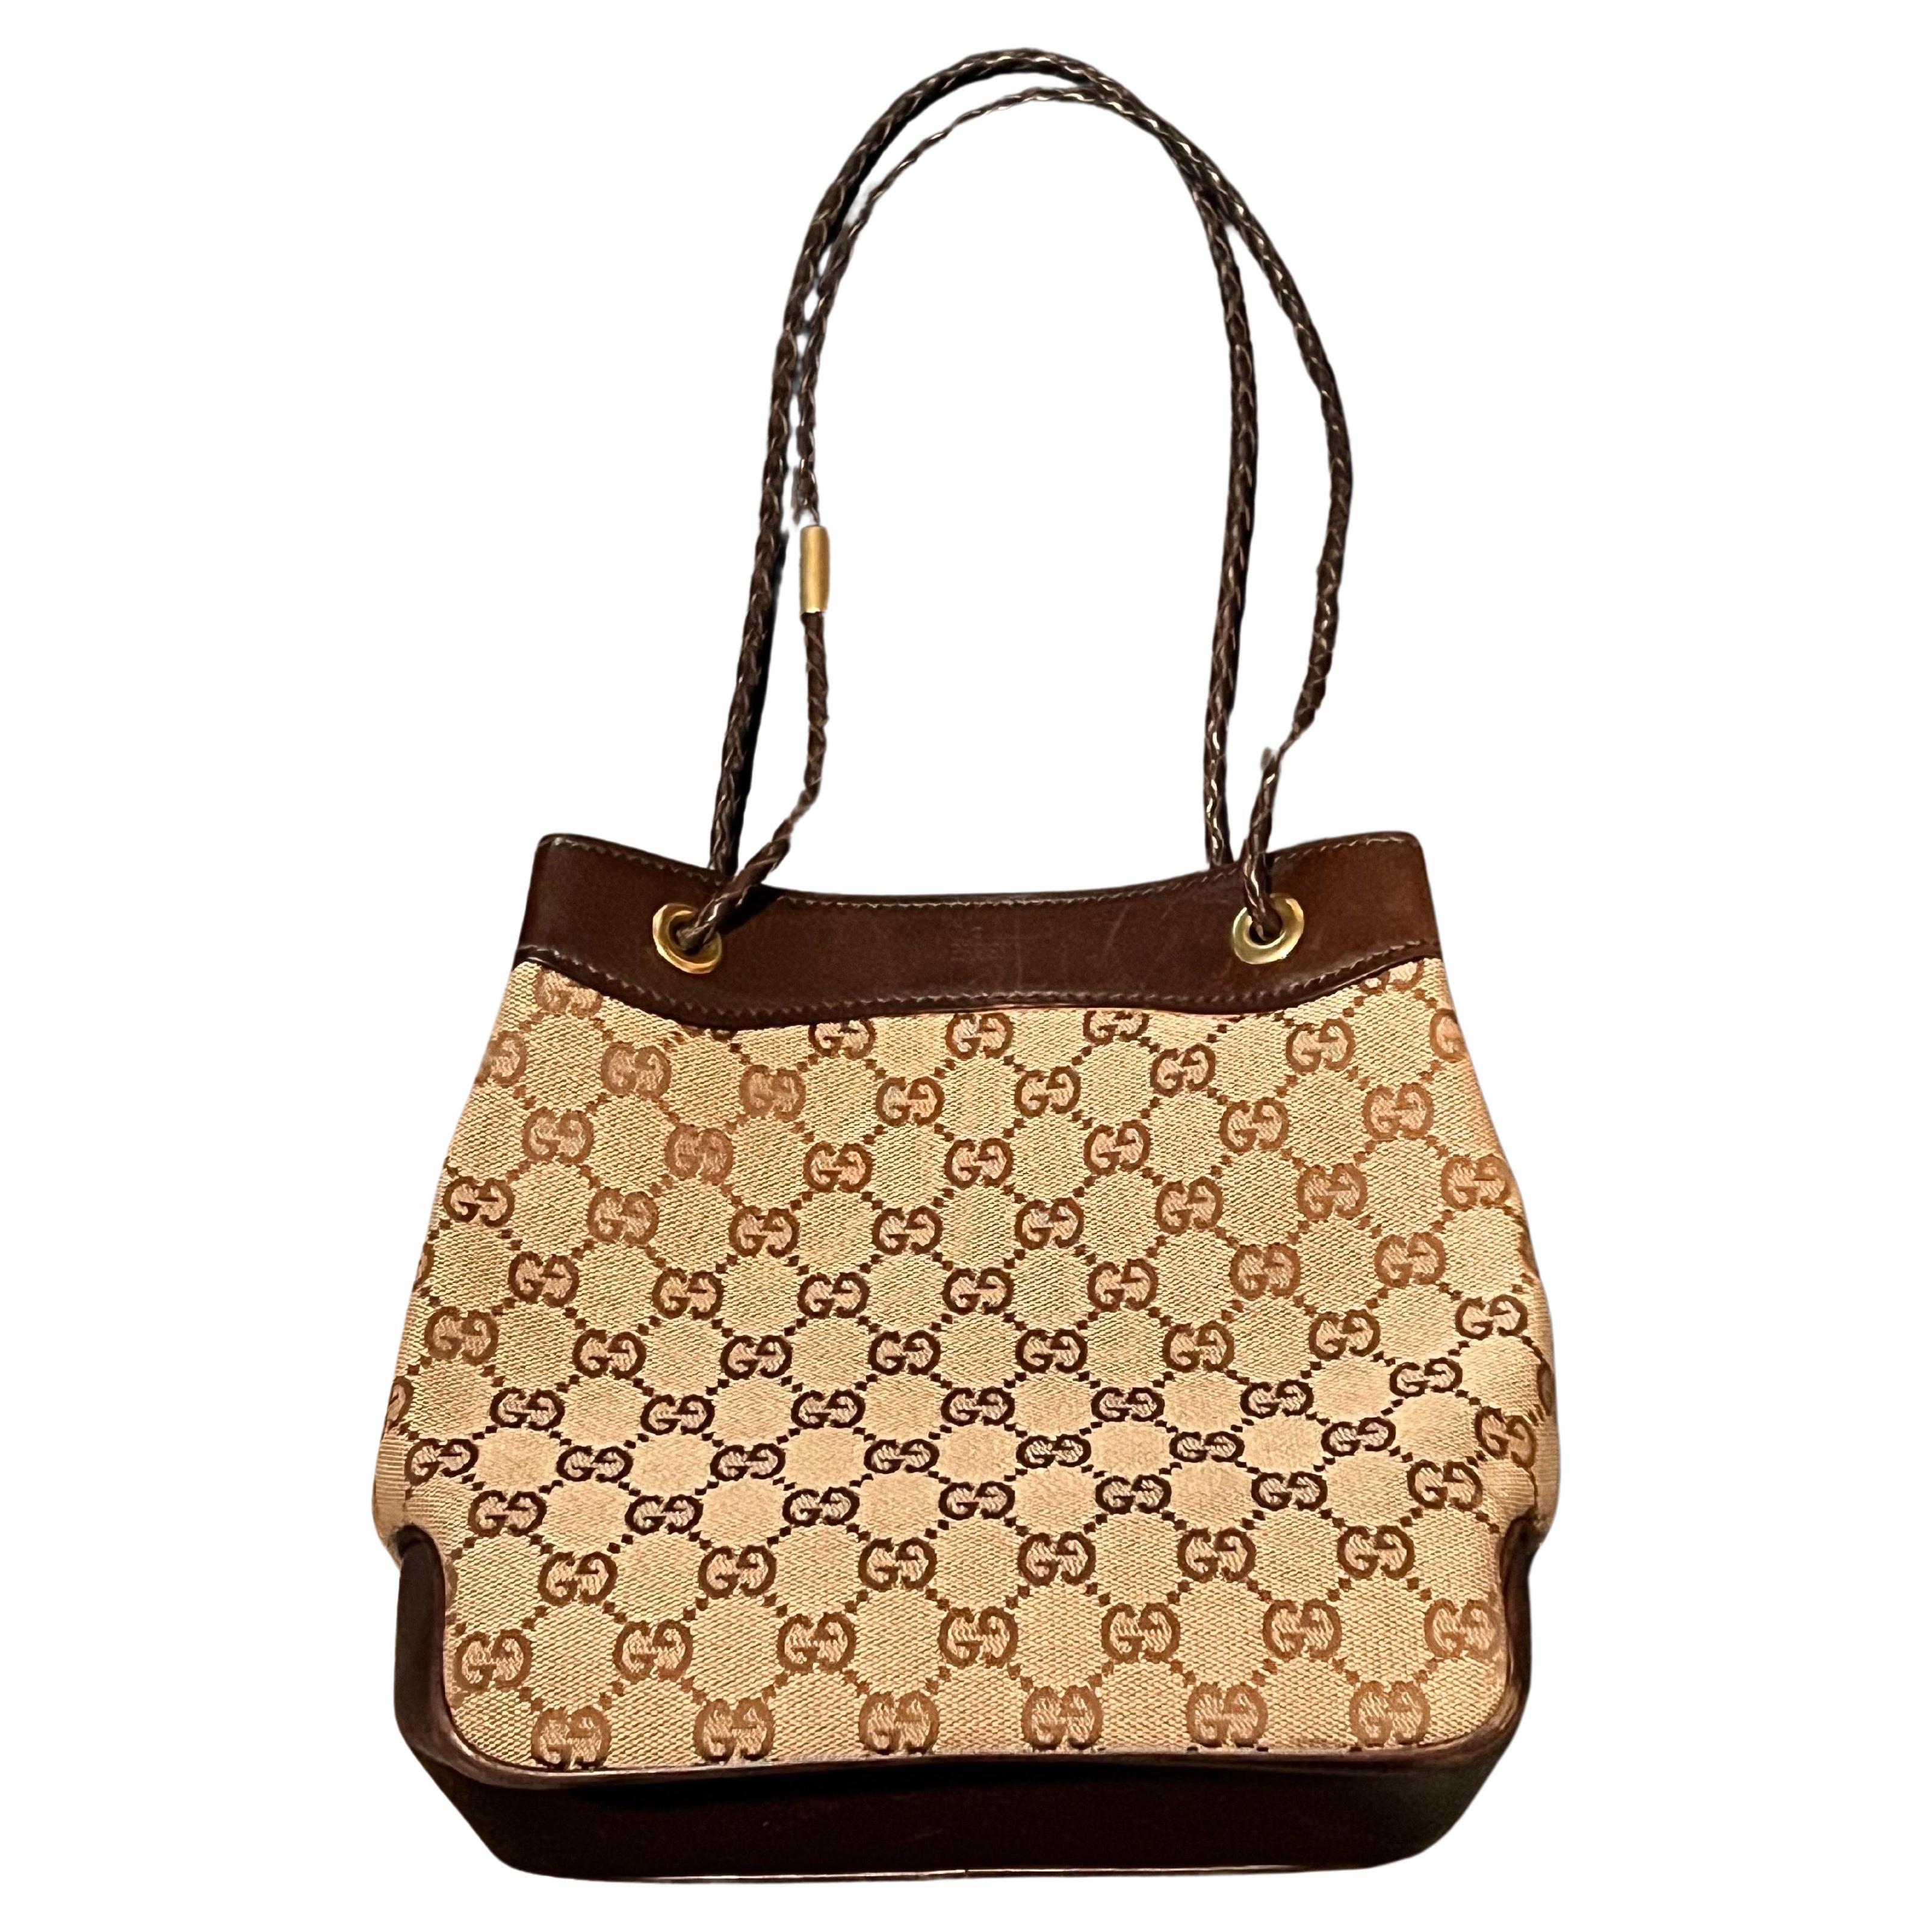 Popular Bags From the Early 2000s